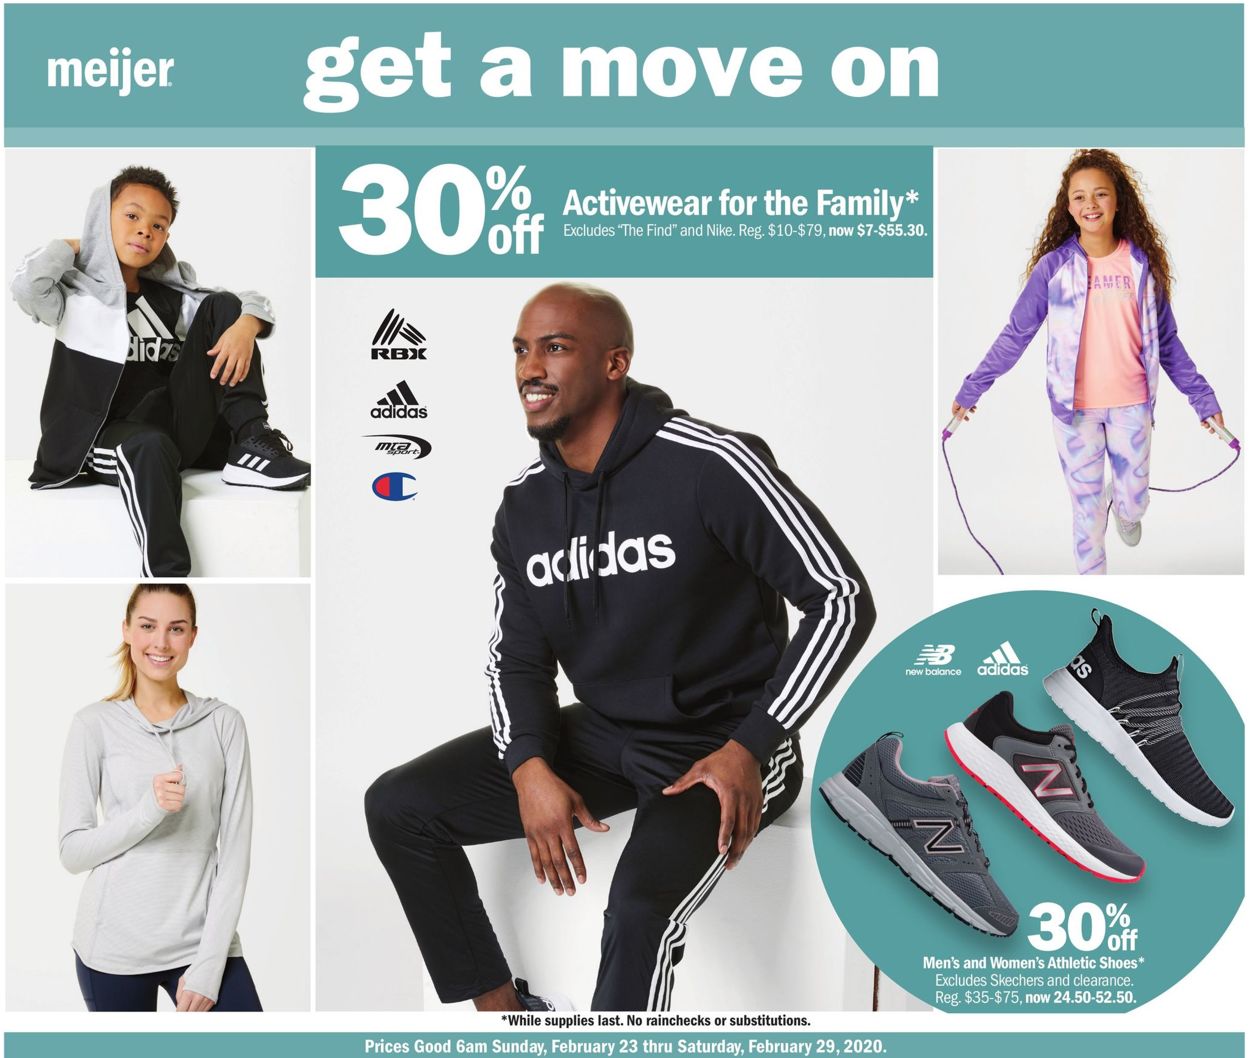 adidas at meijer